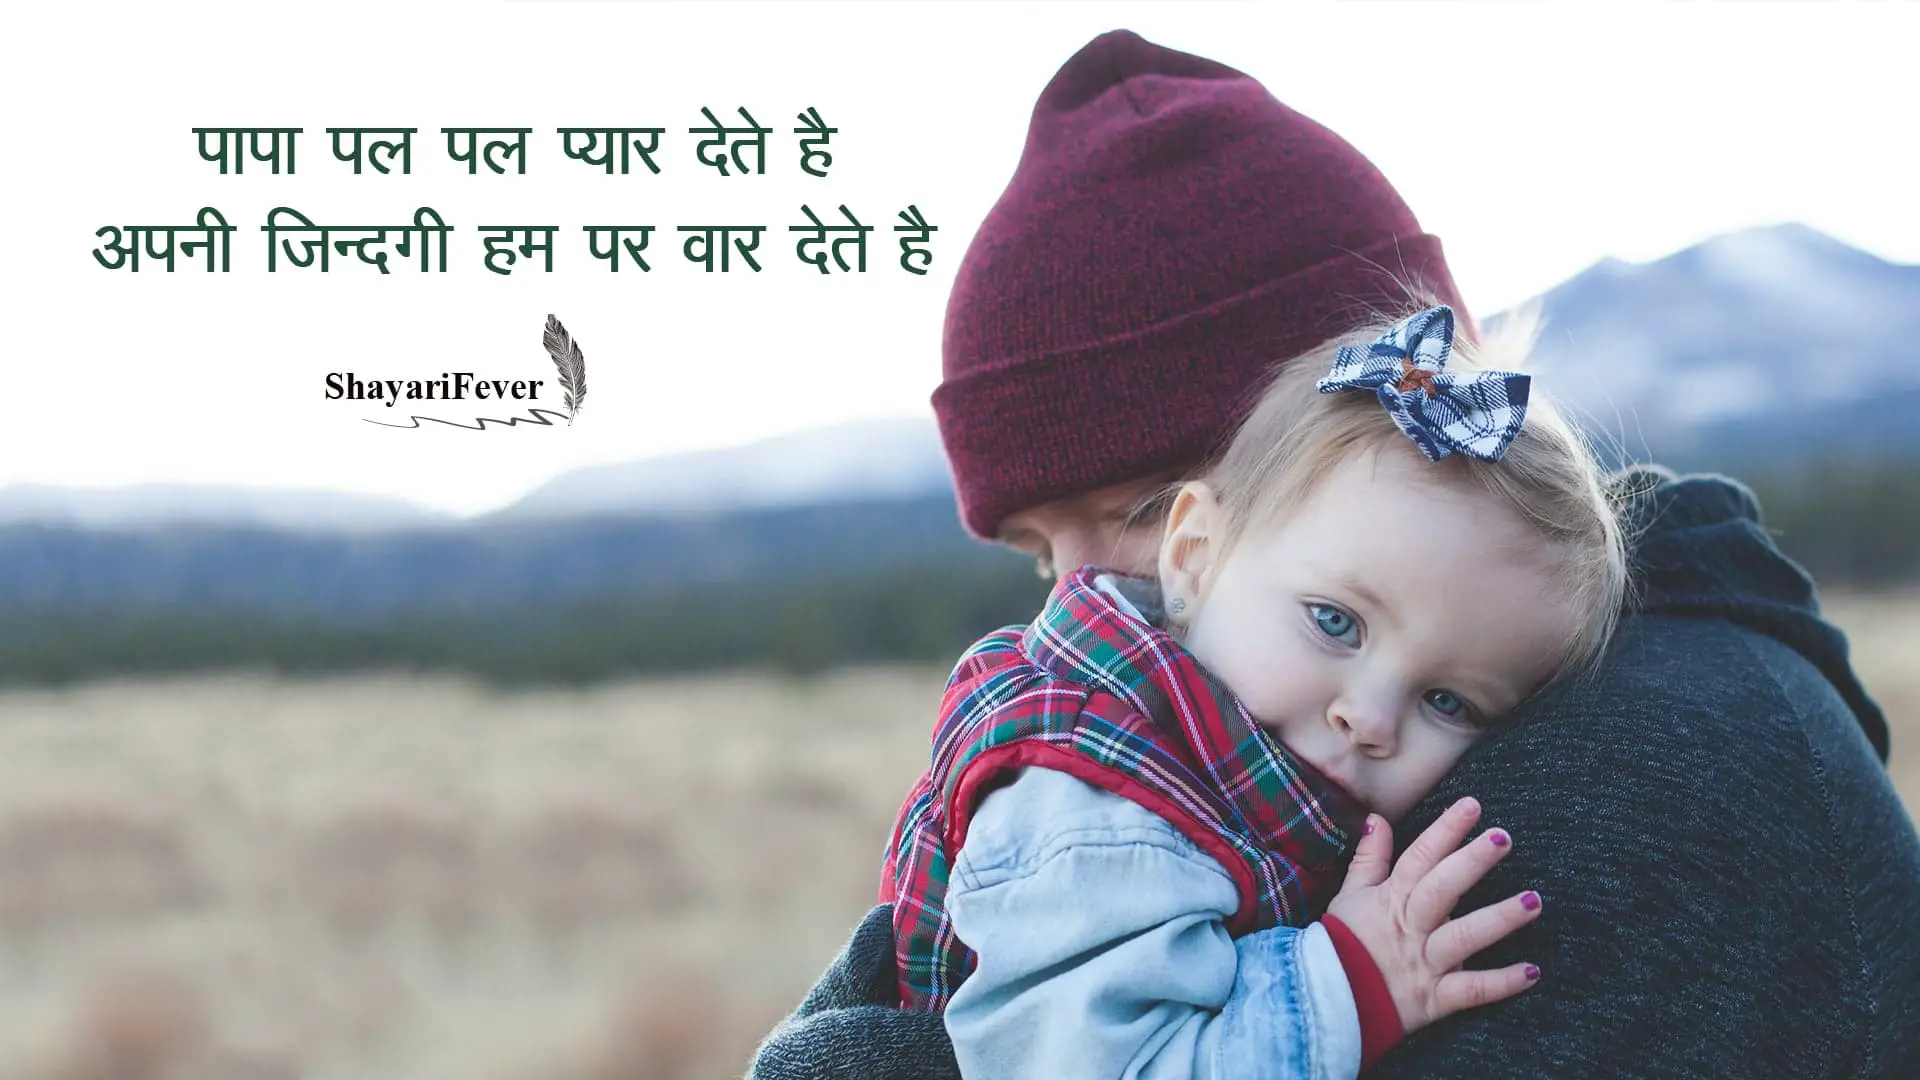 Emotional Quotes On Father In Hindi